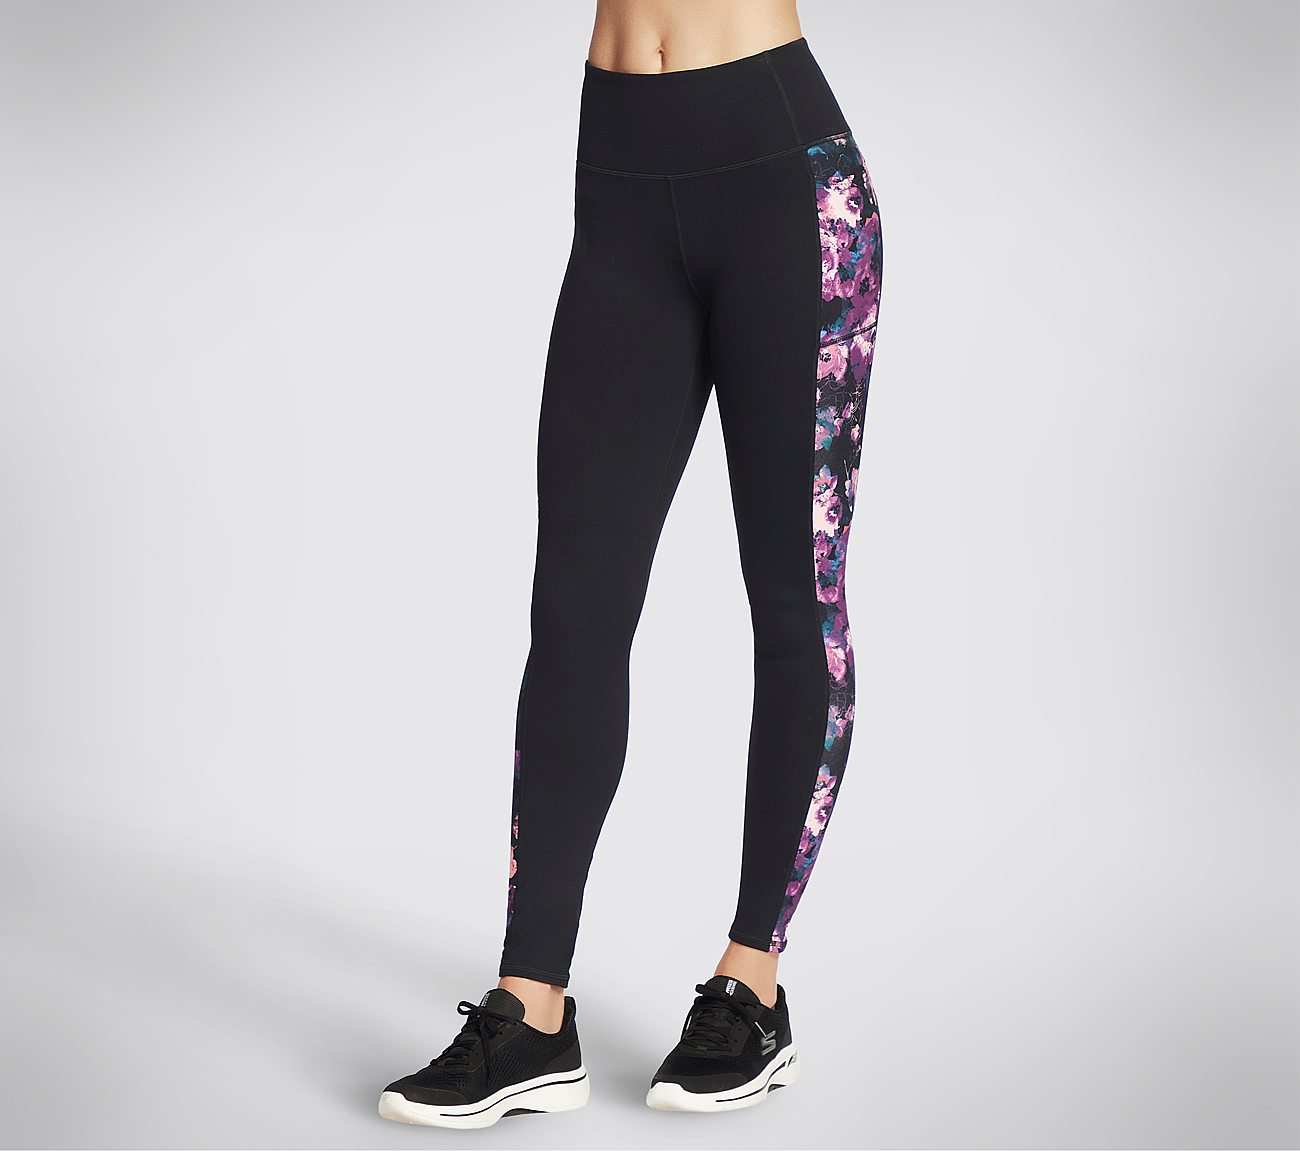 THE GOWALK LINEAR FLORAL FL H, MMULTI Apparels Lateral View